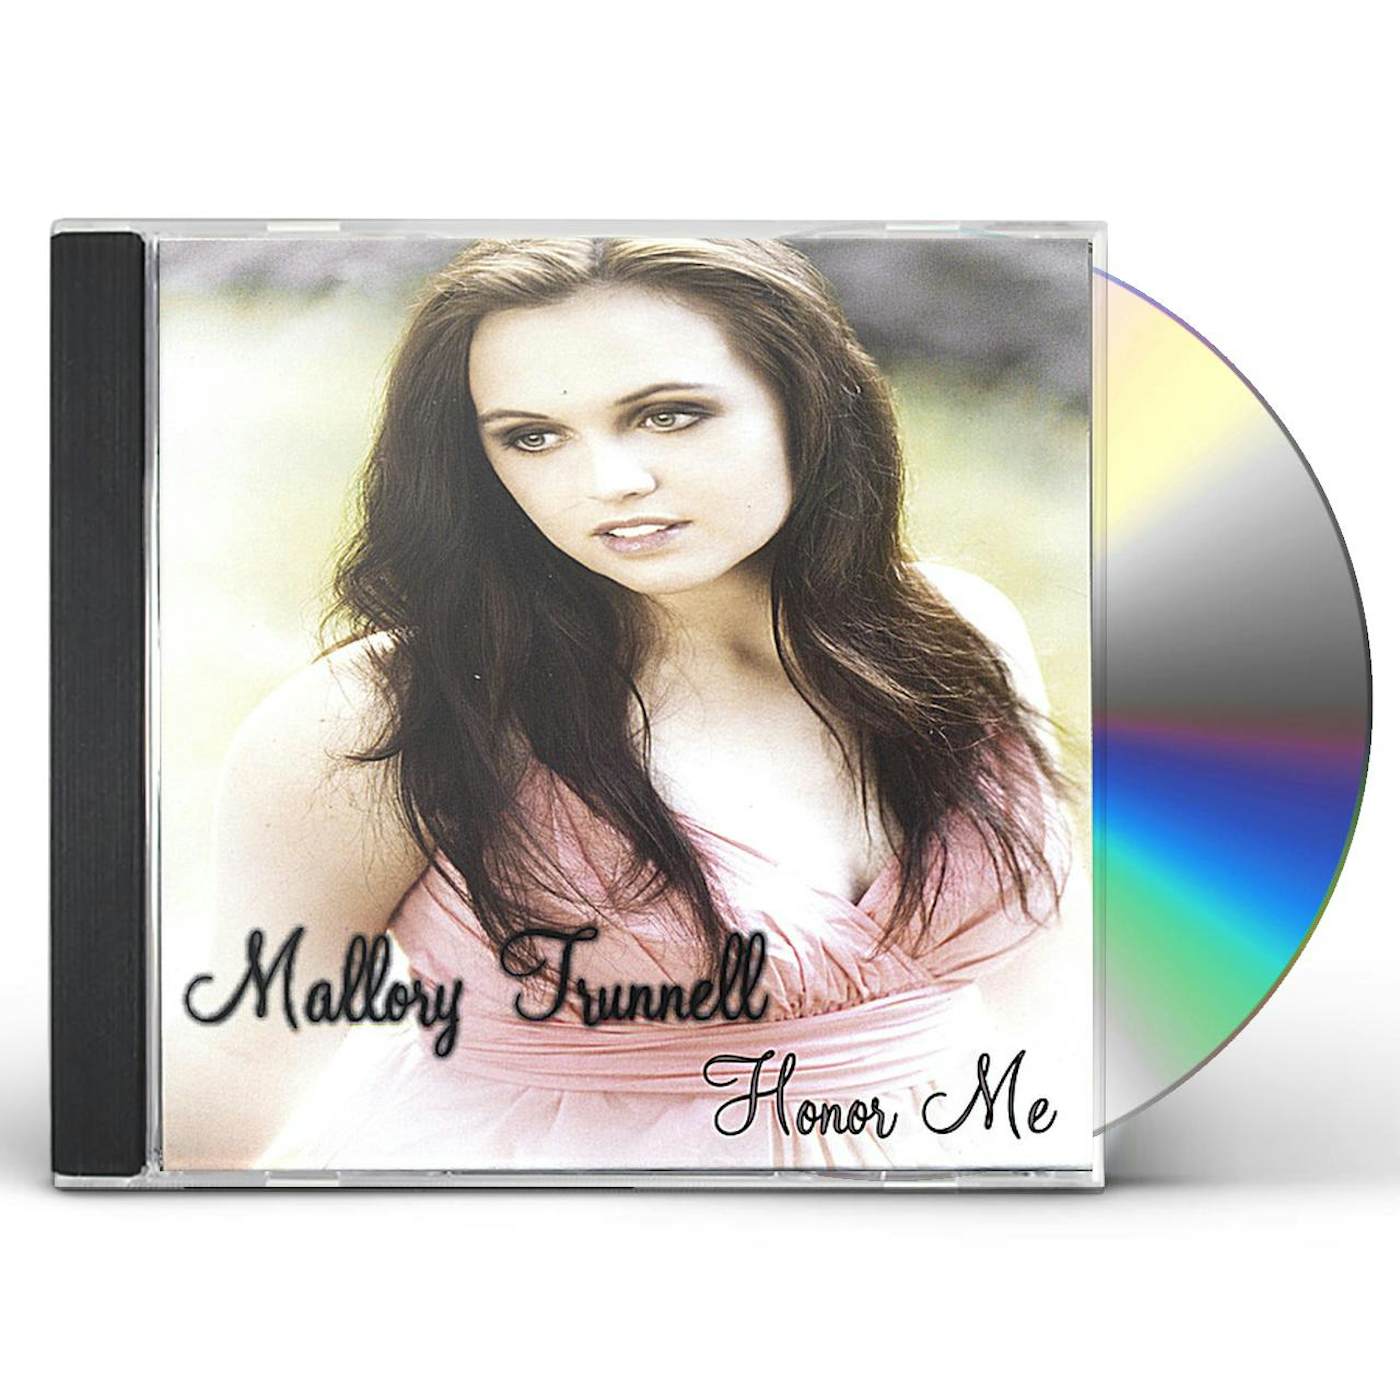 Mallory Trunnell HONOR ME CD